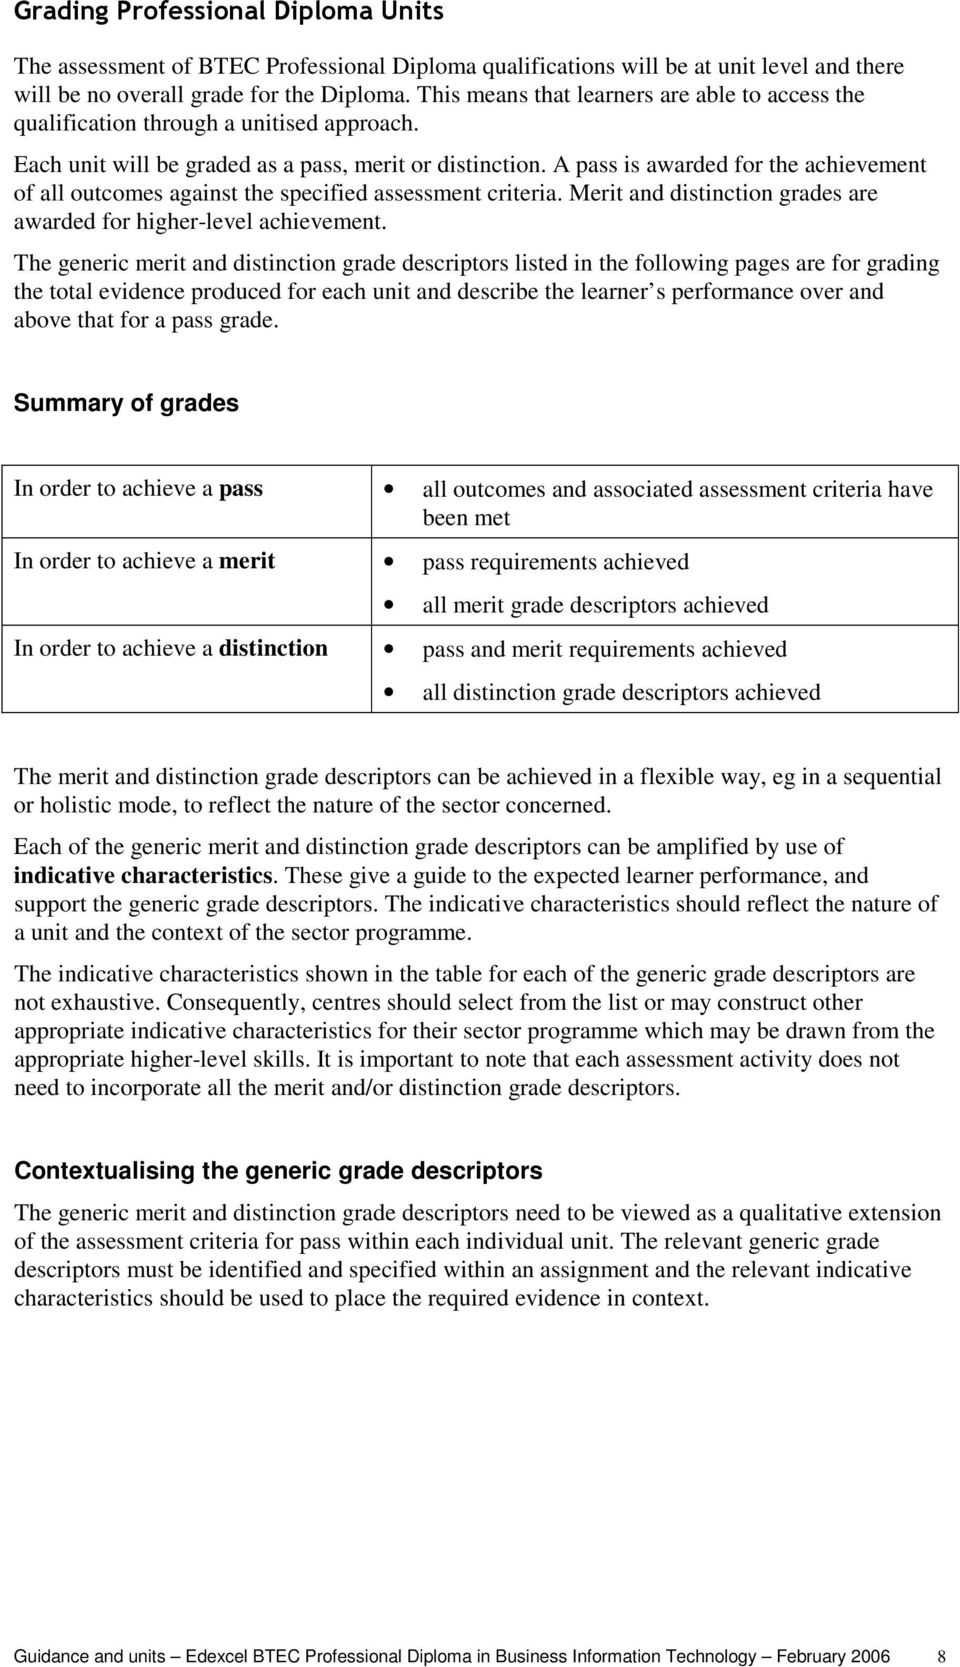 A pass is awarded for the achievement of all outcomes against the specified assessment criteria. Merit and distinction grades are awarded for higher-level achievement.